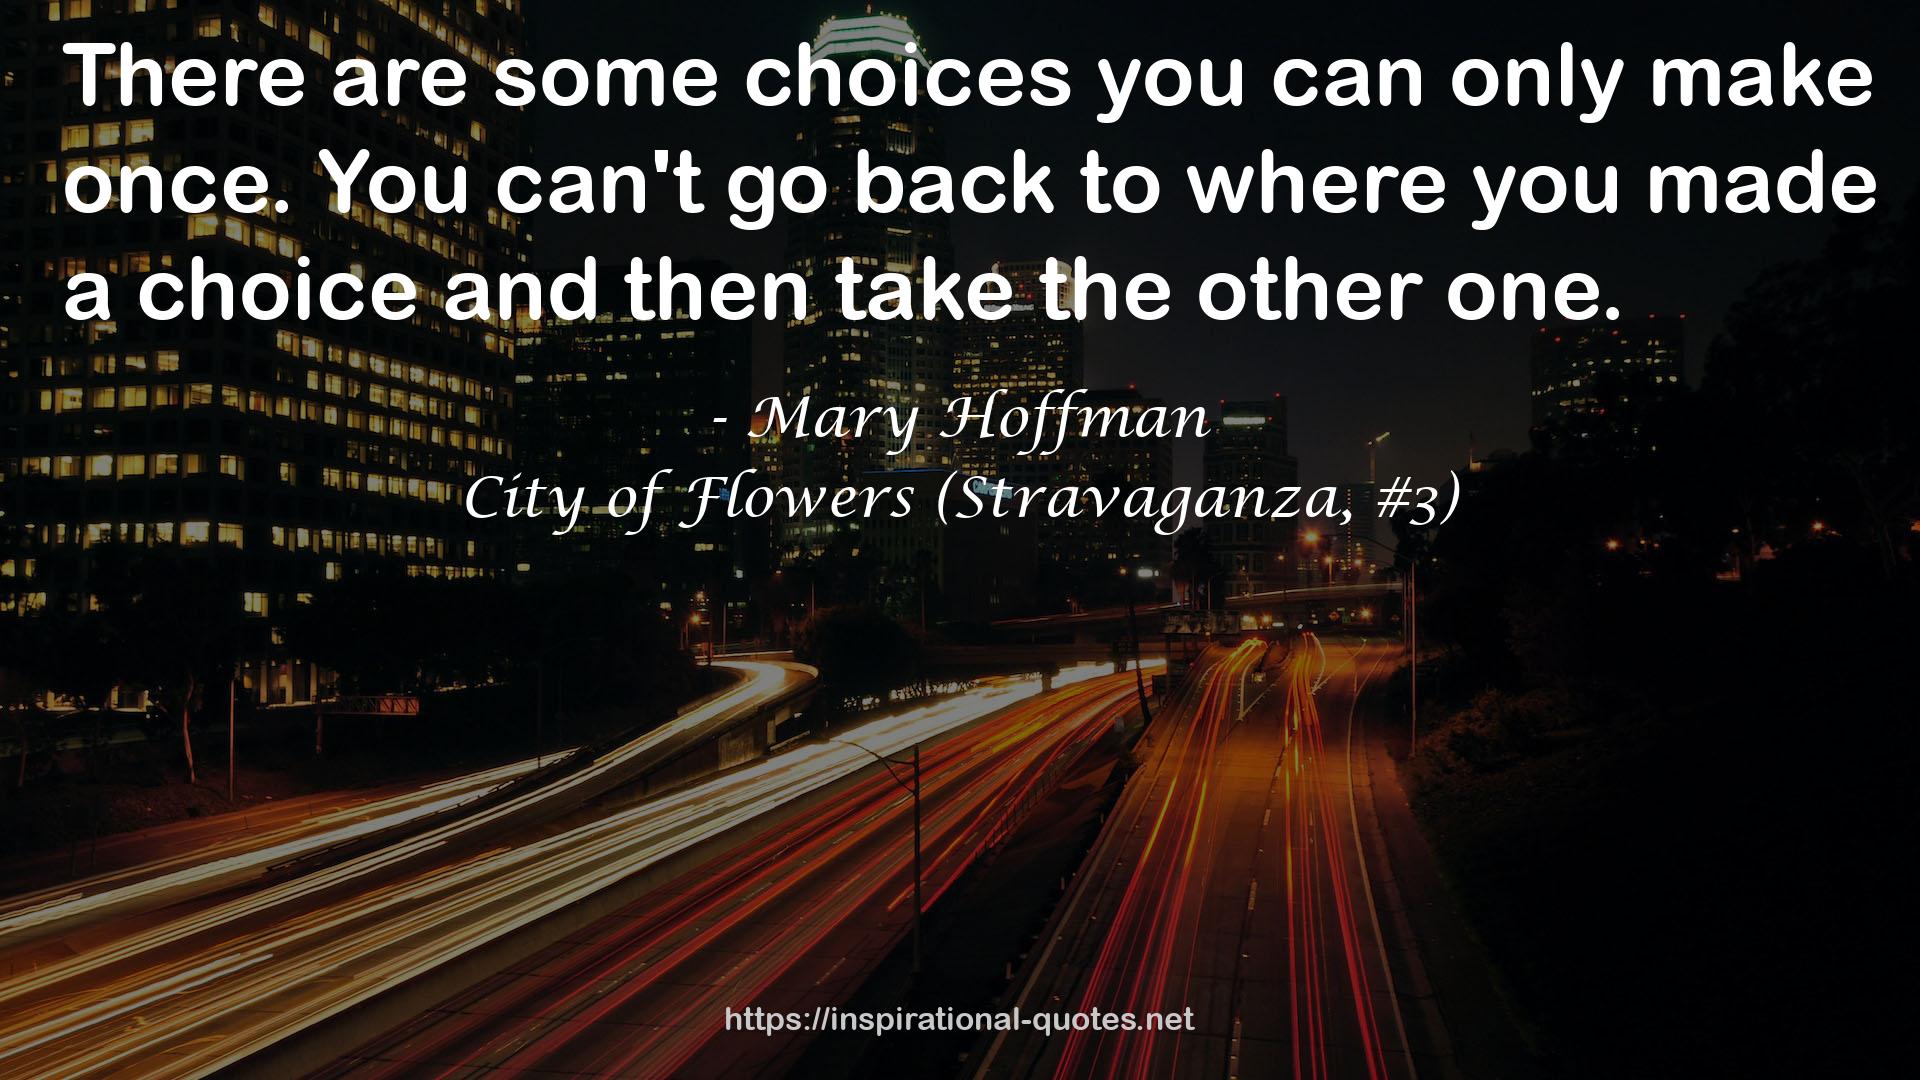 Mary Hoffman QUOTES